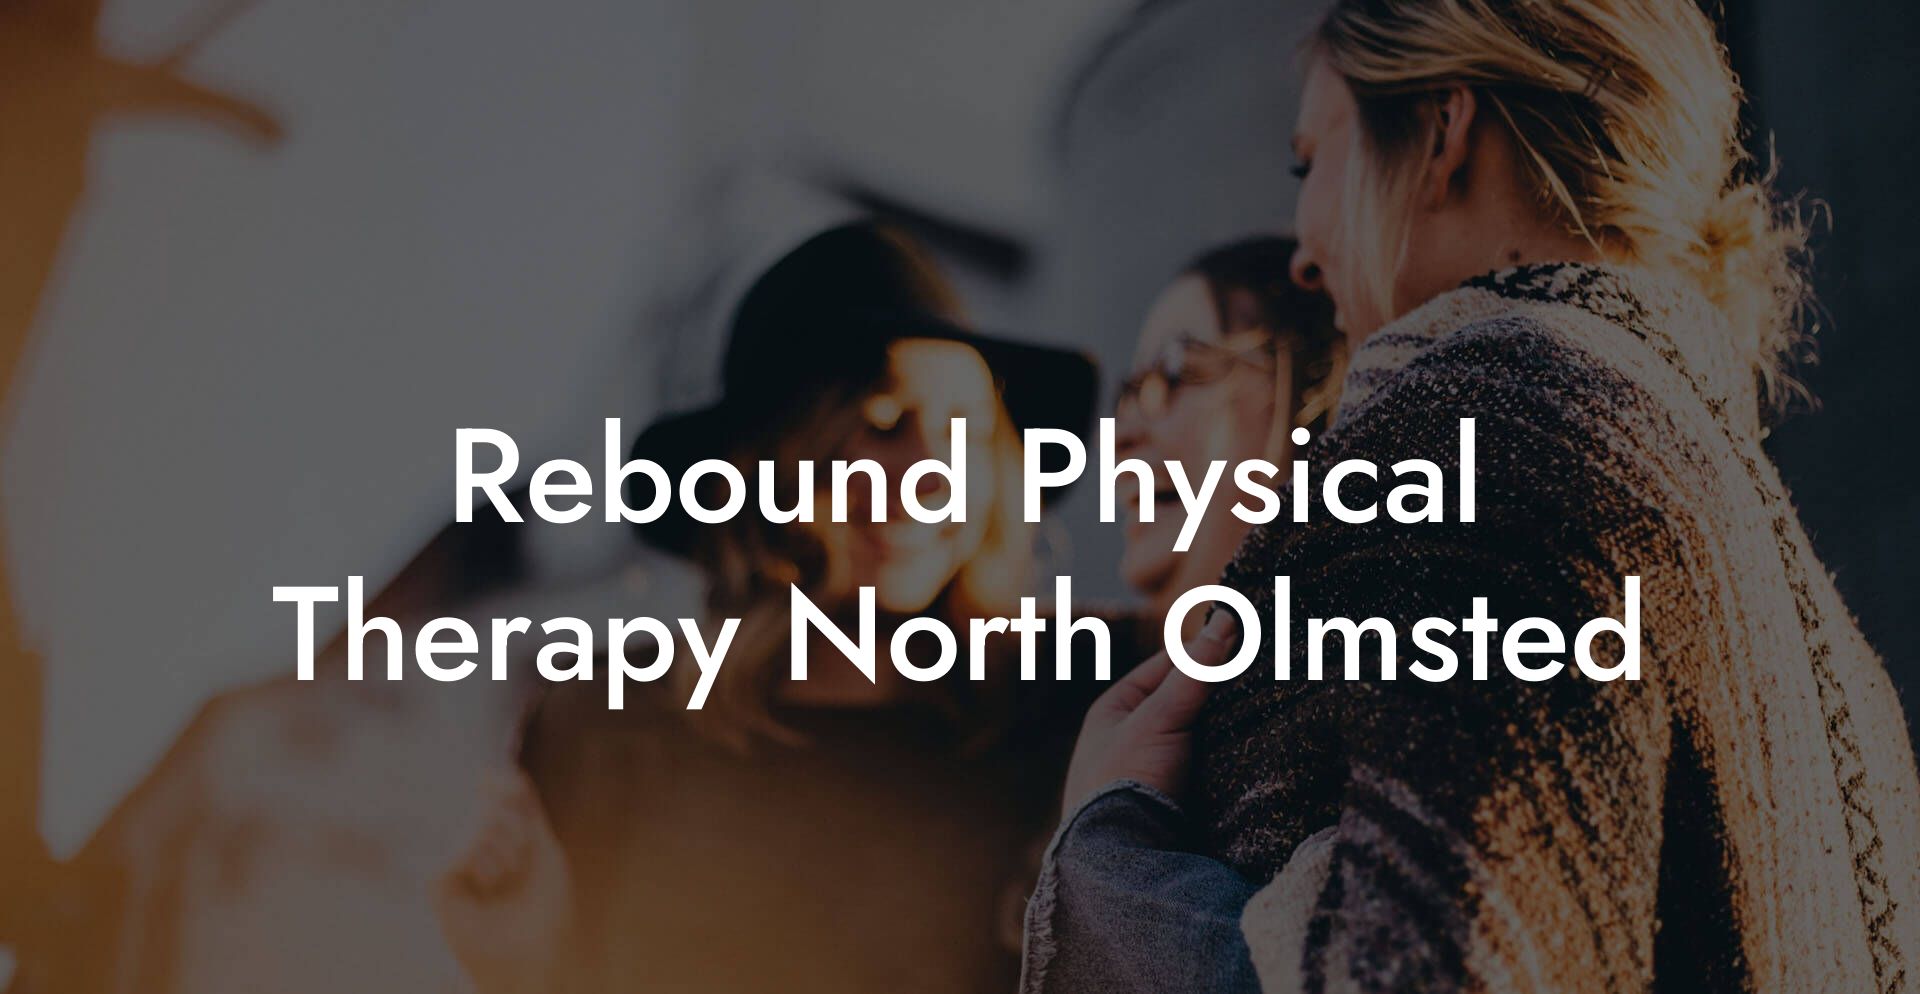 Rebound Physical Therapy North Olmsted